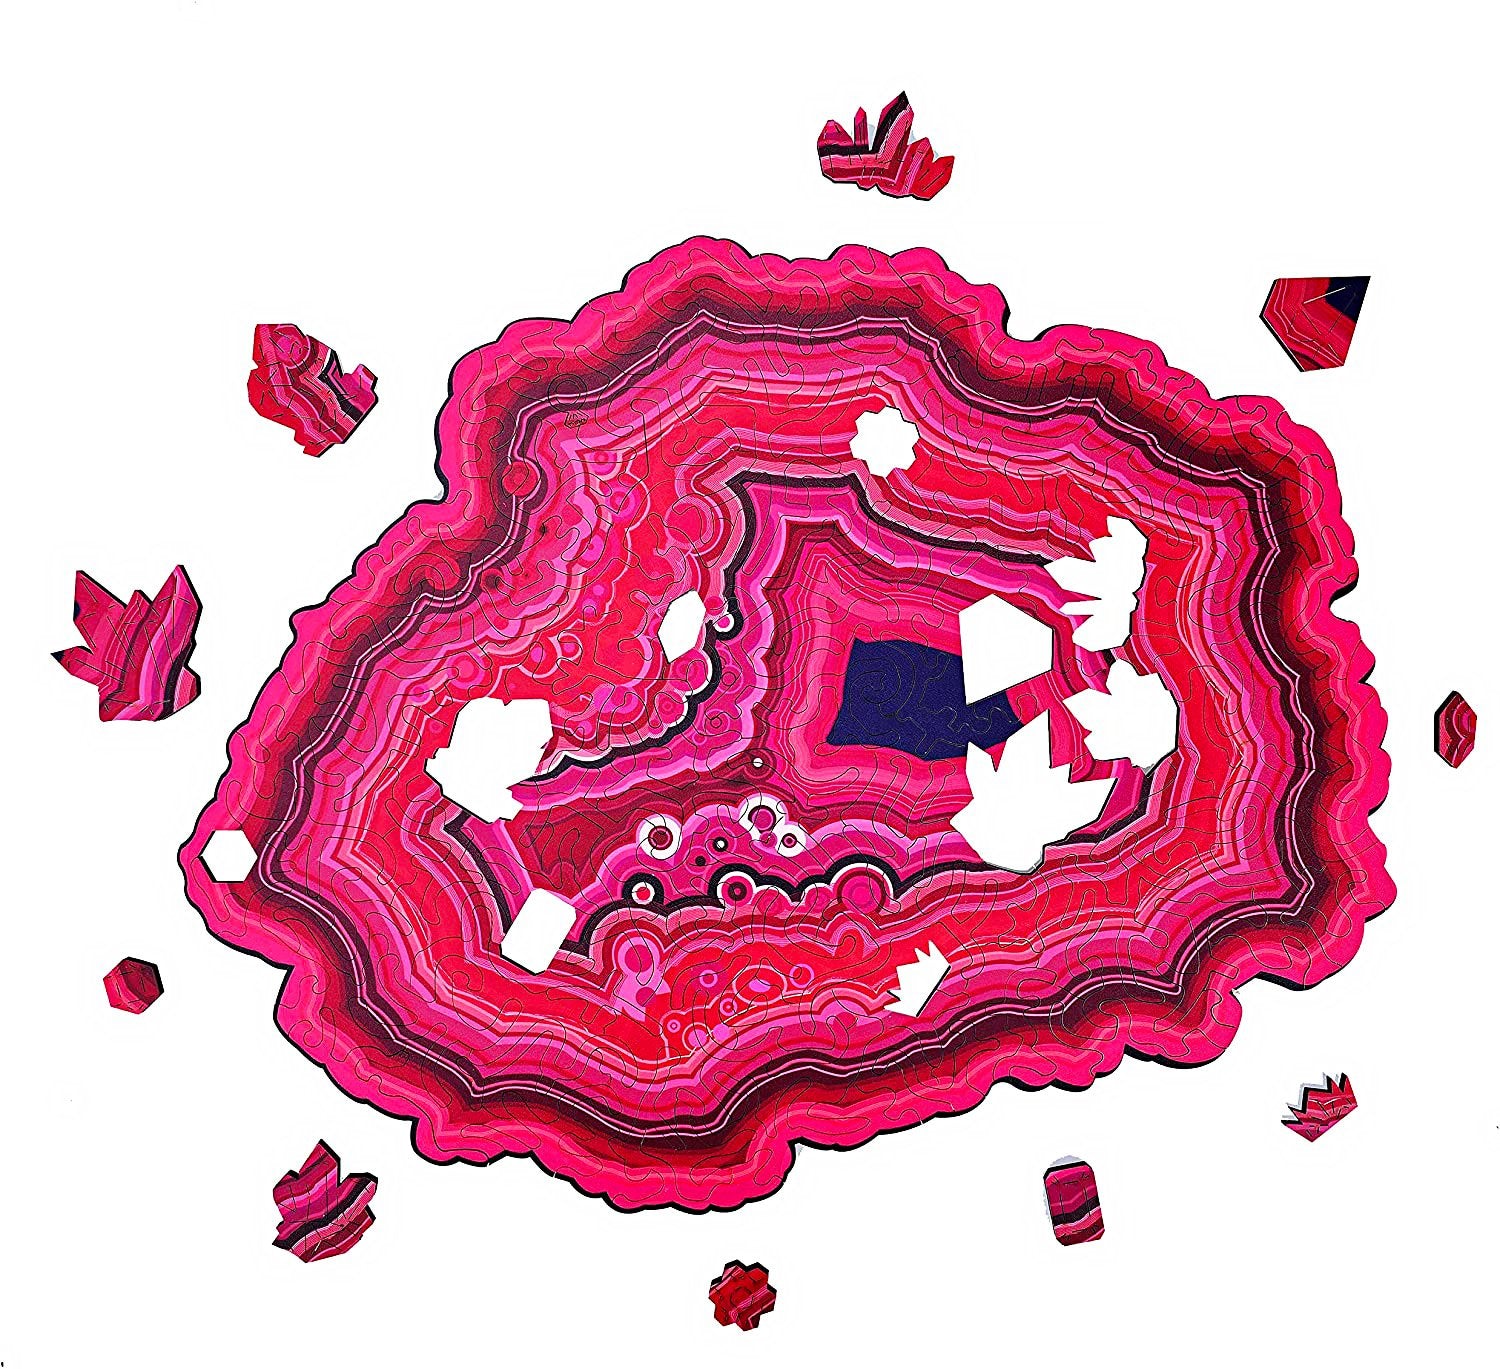 This wooden agate jigsaw puzzle is different. It's small with fewer pieces, but so fun and still extremely challenging because the pieces fit together so uniquely. The wooden pieces are thick and sturdy so they fit together well. 